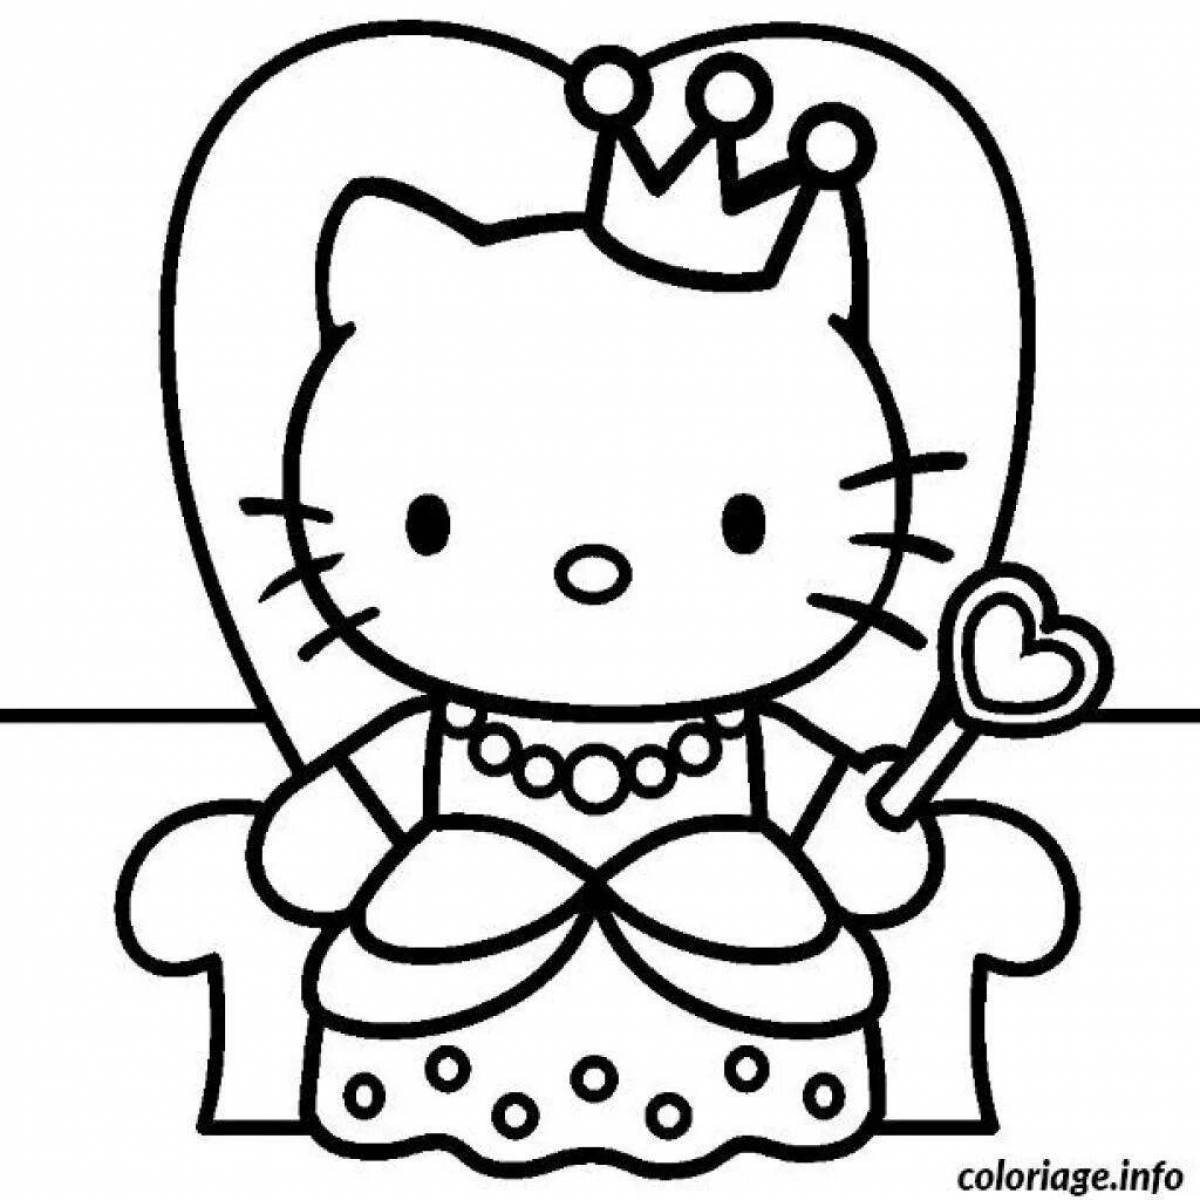 Adorable hello kitty character coloring page